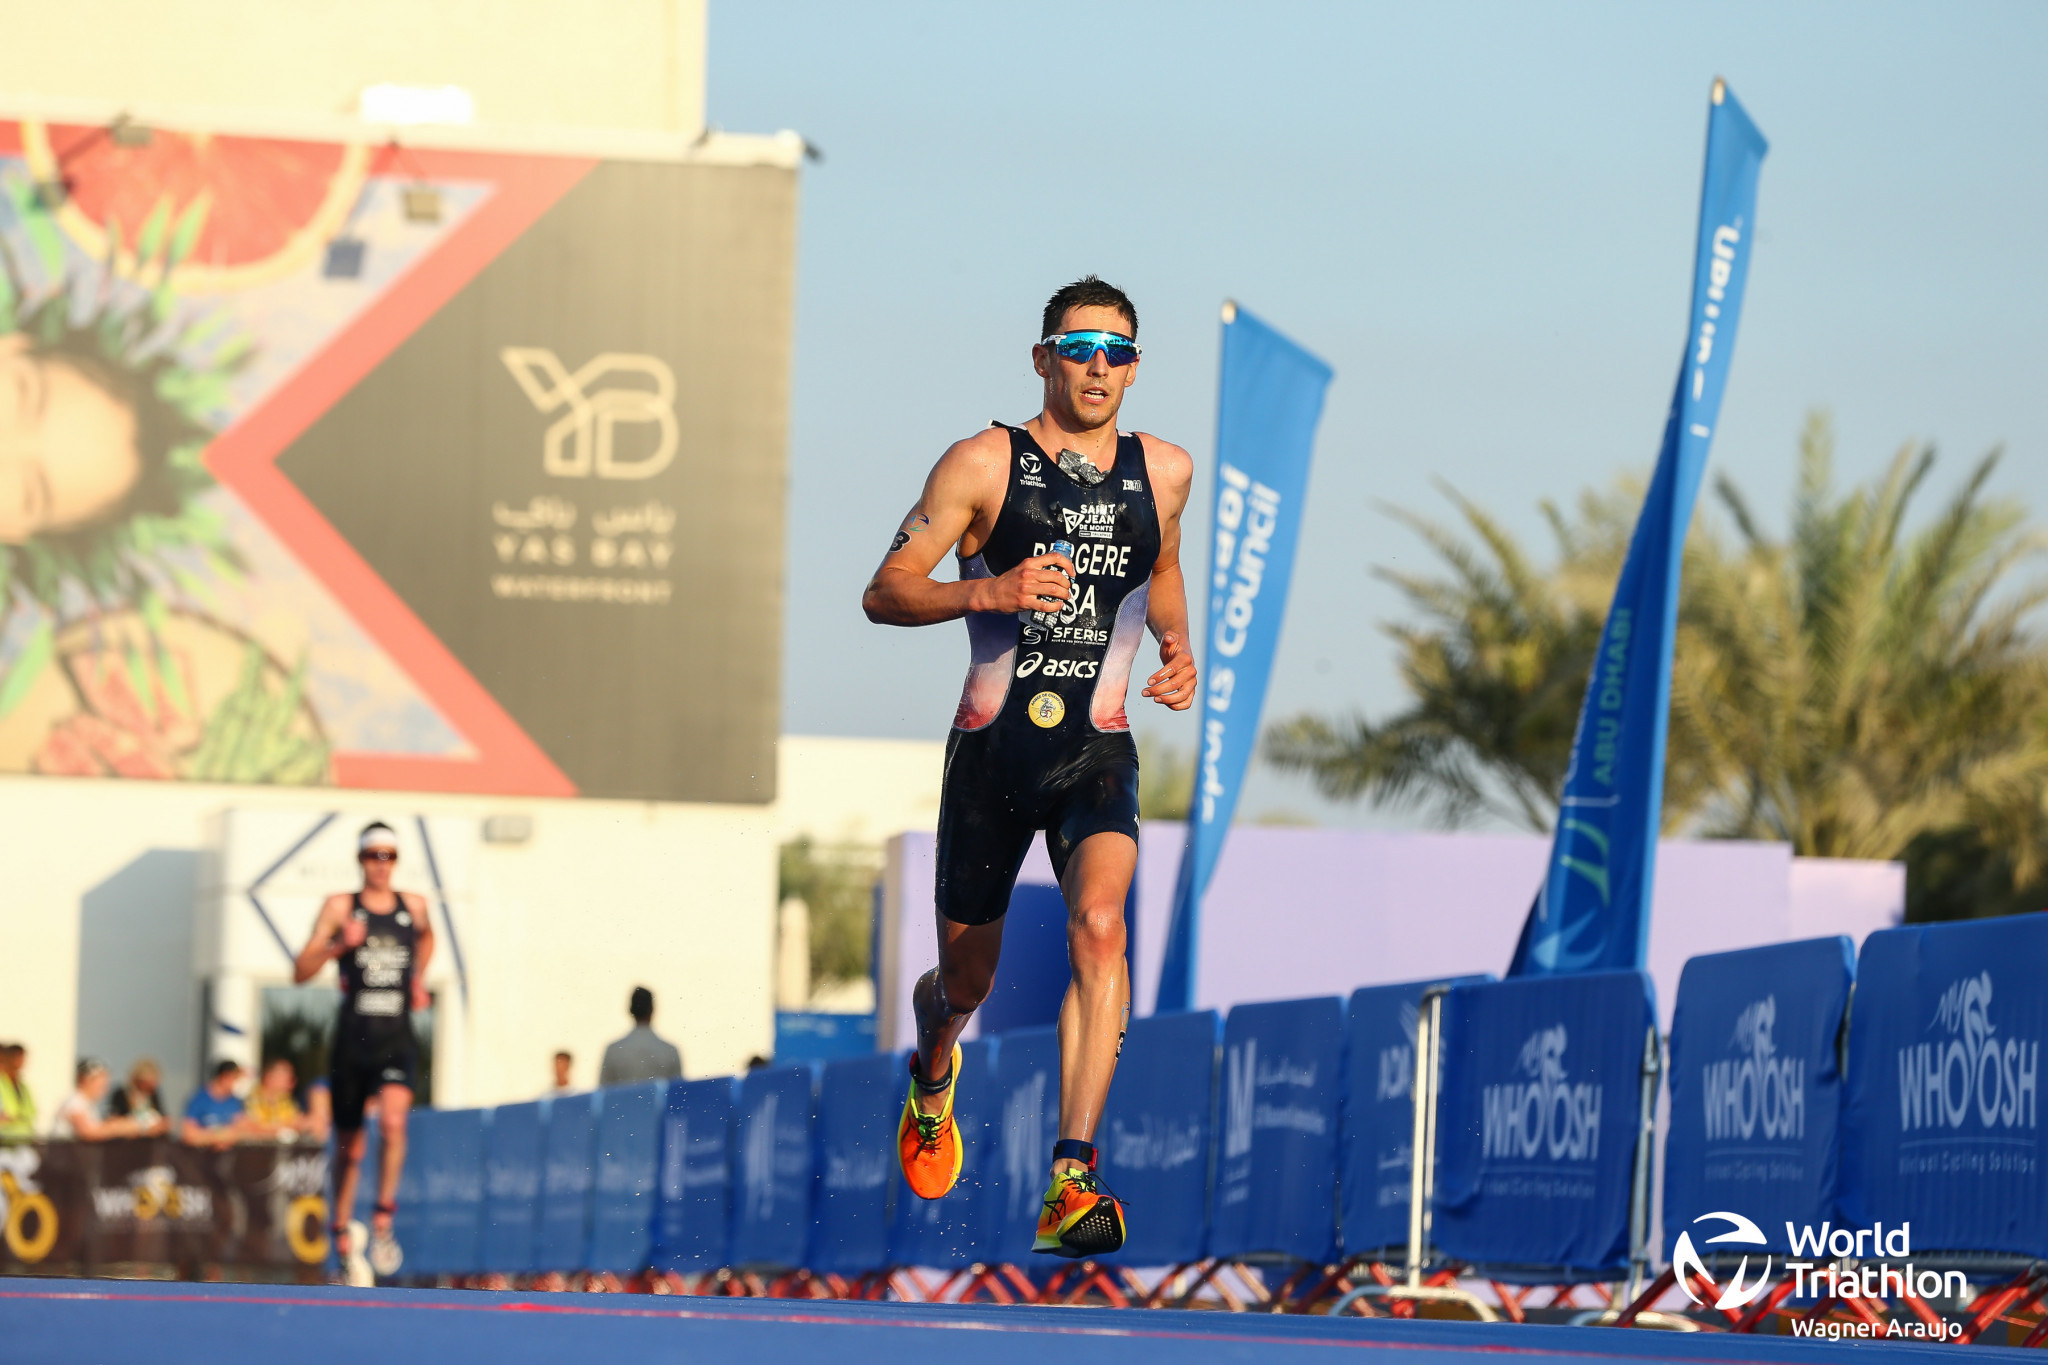 France's Léo Bergère earned a shock world title in the elite men's race that concluded the Championship Finals ©World Triathlon